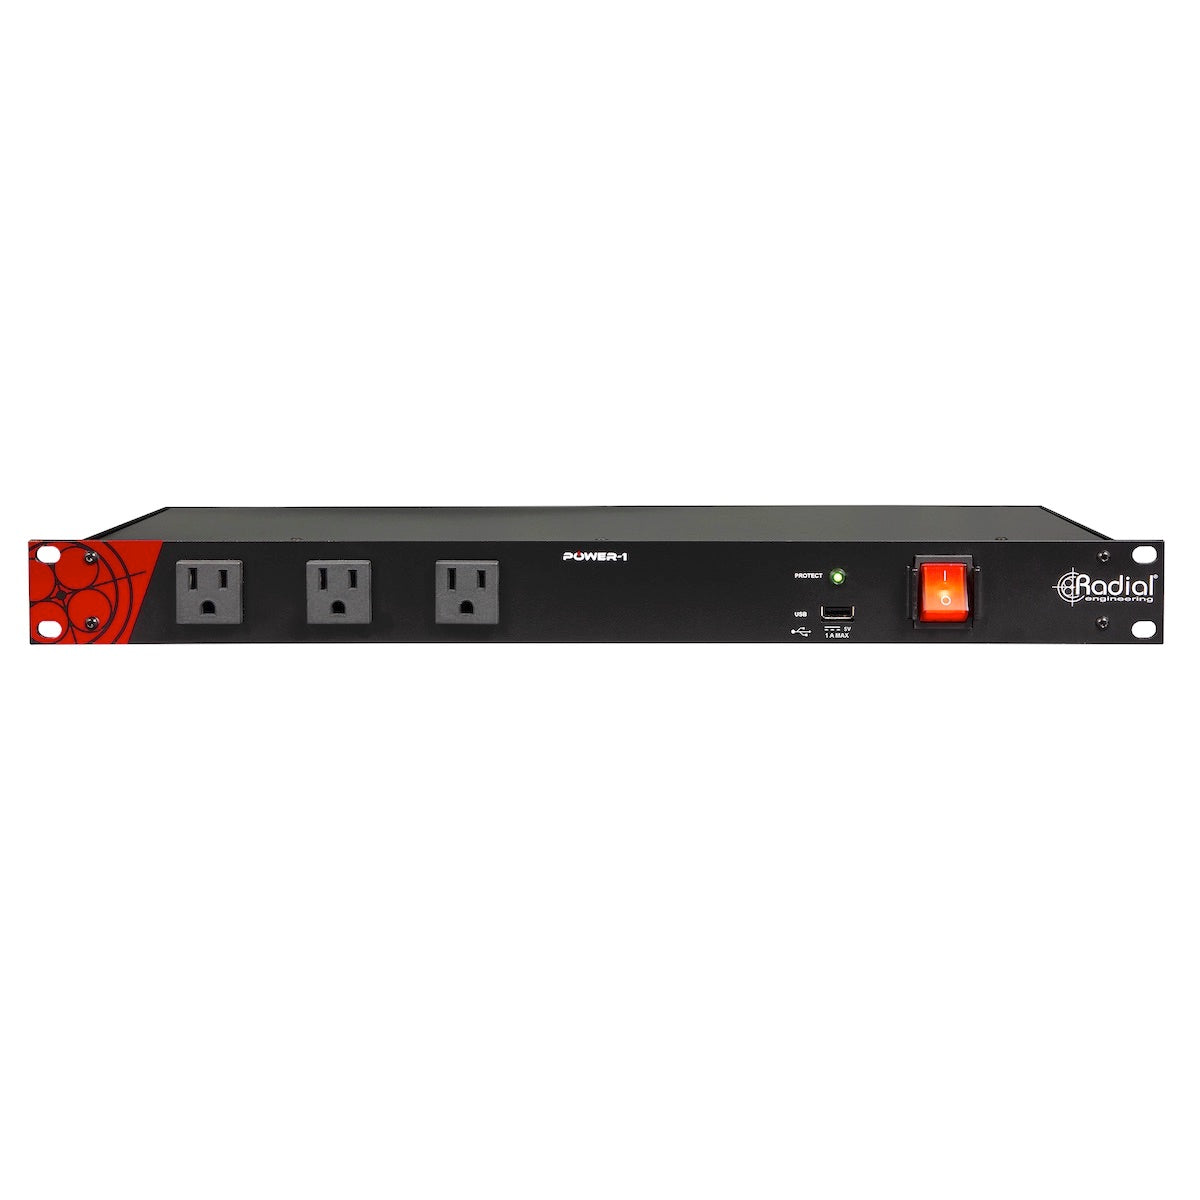 Radial Power-2 - Rackmount Power Conditioner Surge Suppressor with LED